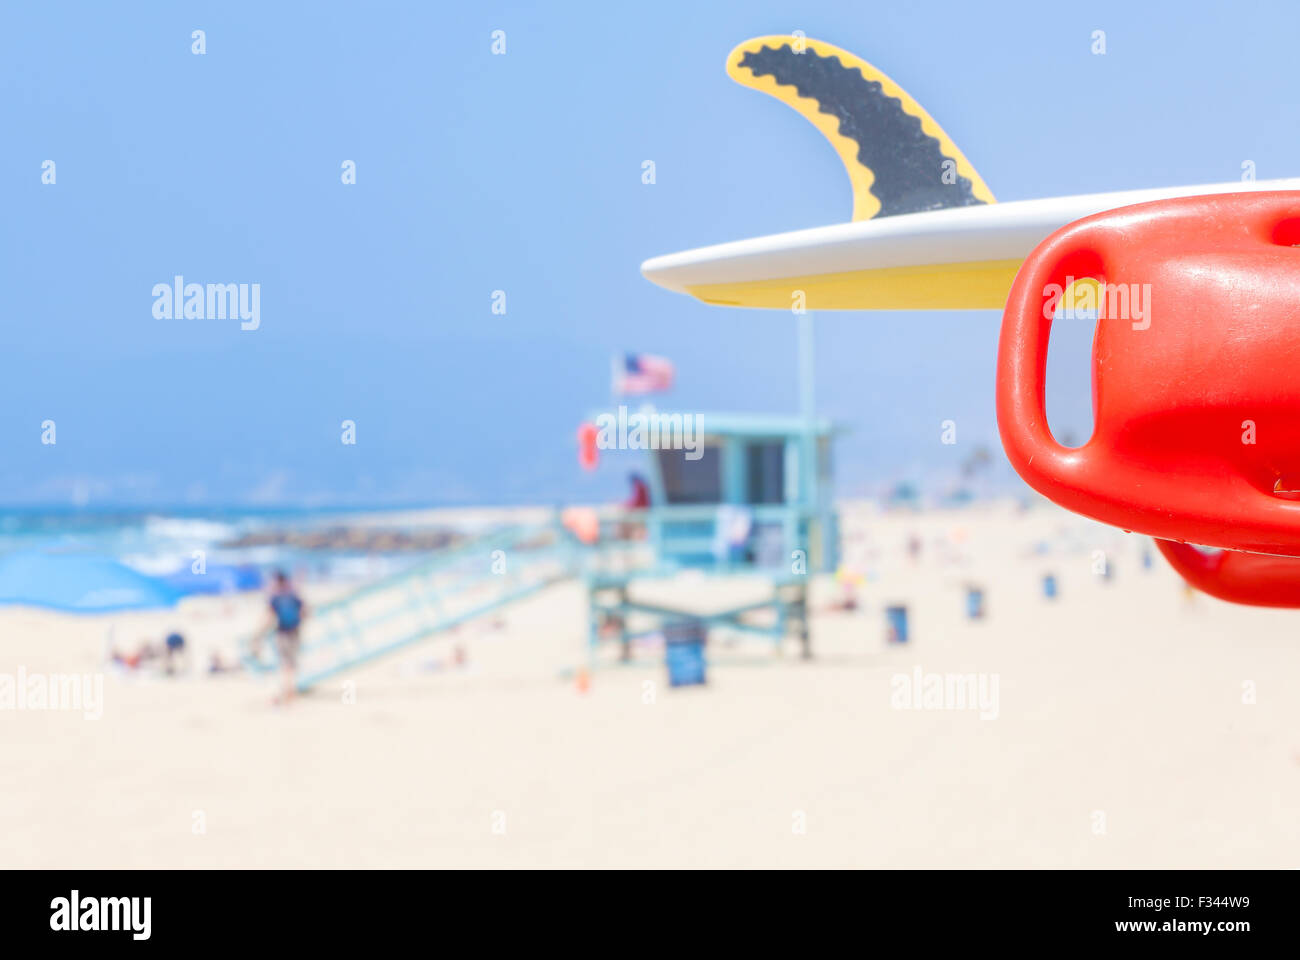 Lifeguard red buoy on a beach with lifeguard tower in distance, shallow depth of field, space for text, California, USA. Stock Photo